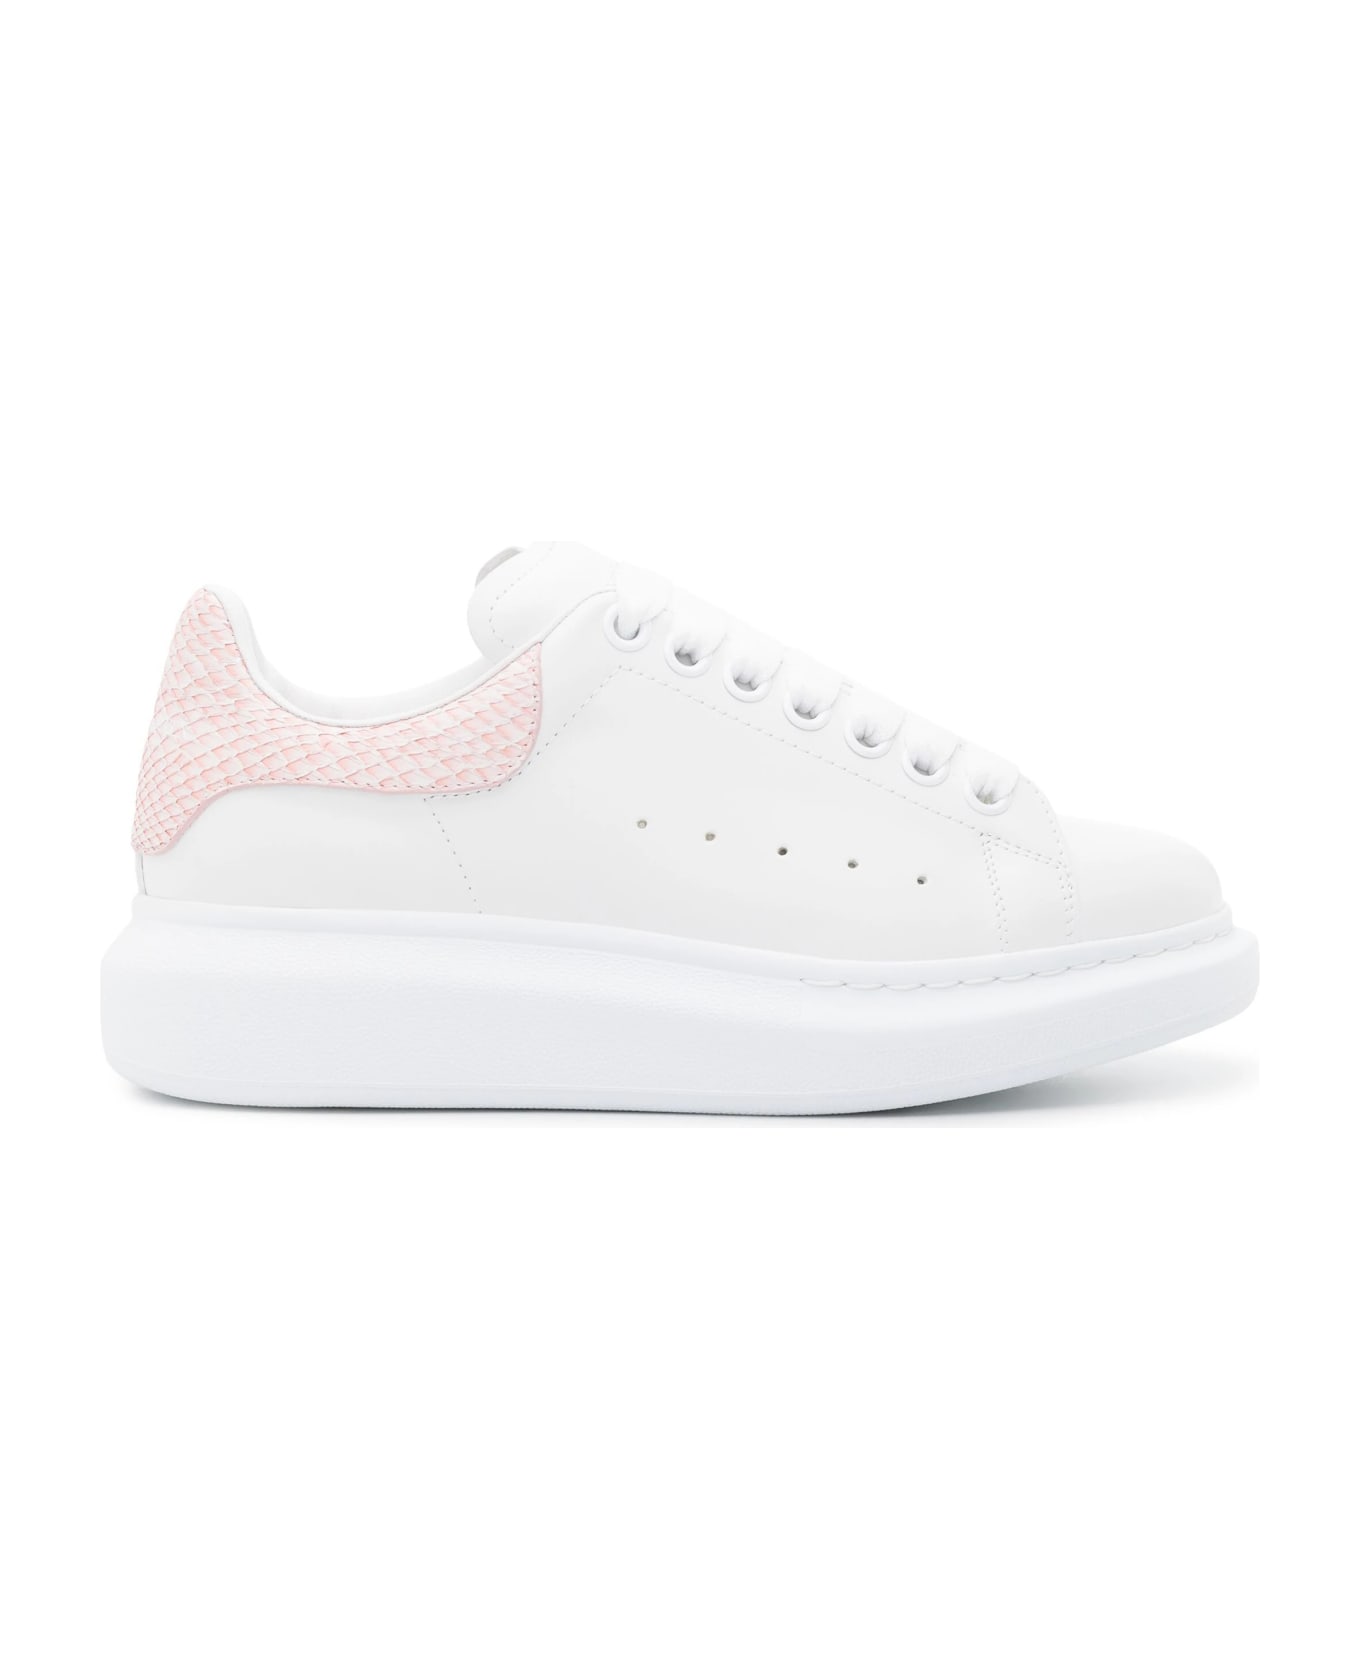 Alexander McQueen White Oversized Sneakers With Powder Pink Python Spoiler - White